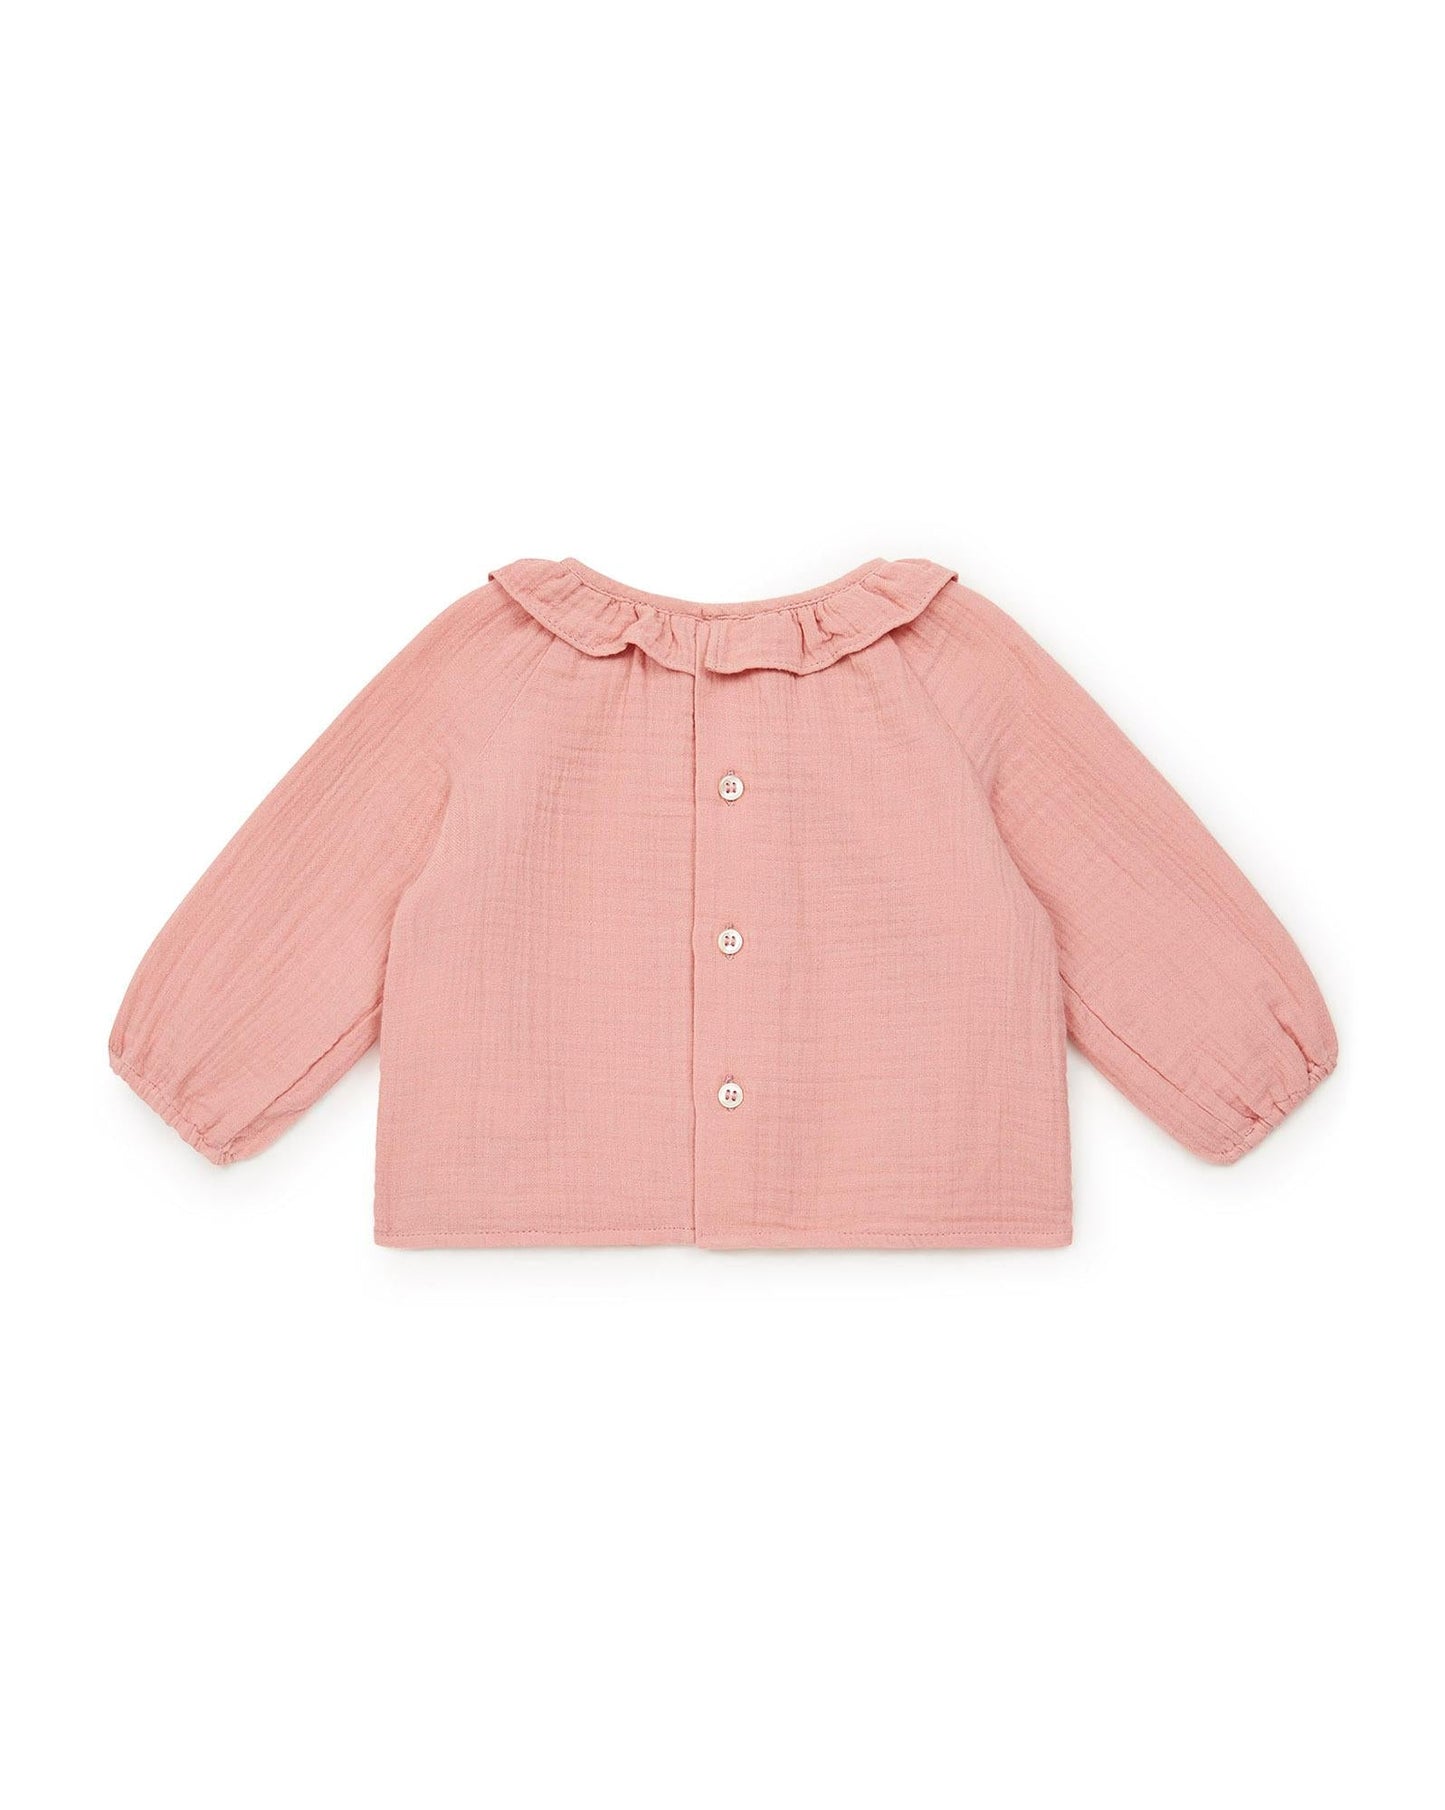 Blouse - Mamour Pink Baby has Collar steering wheel in 100% organic cotton certified GOTS